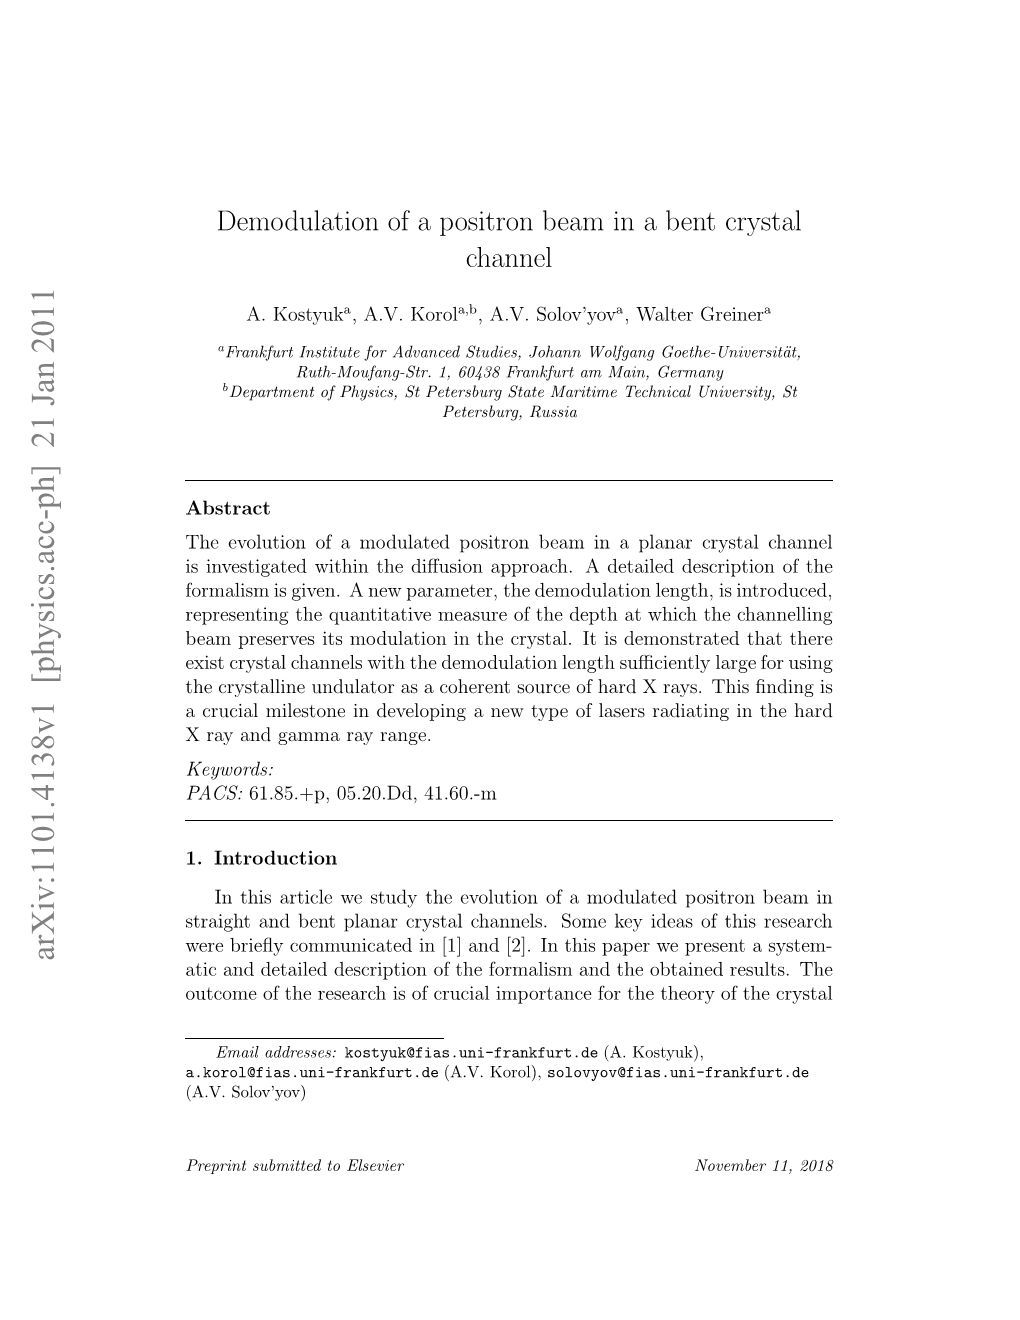 Demodulation of a Positron Beam in a Bent Crystal Channel